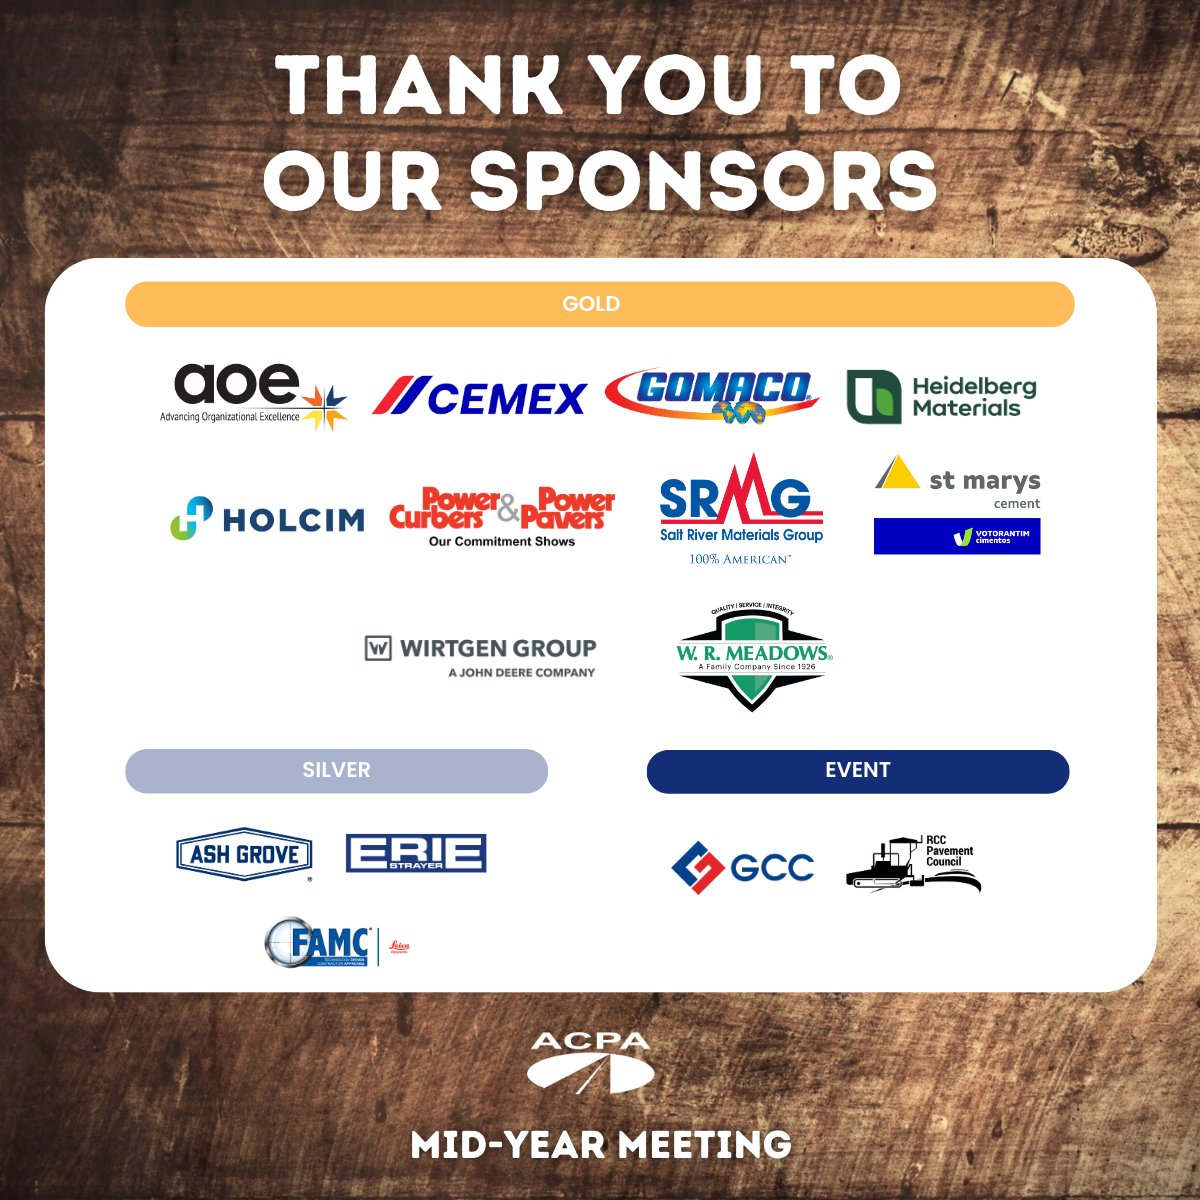 ACPA would like to thank our 2022-23 sponsors for their continued support. Keep an eye out for our 2023-24 sponsorship program, coming soon.